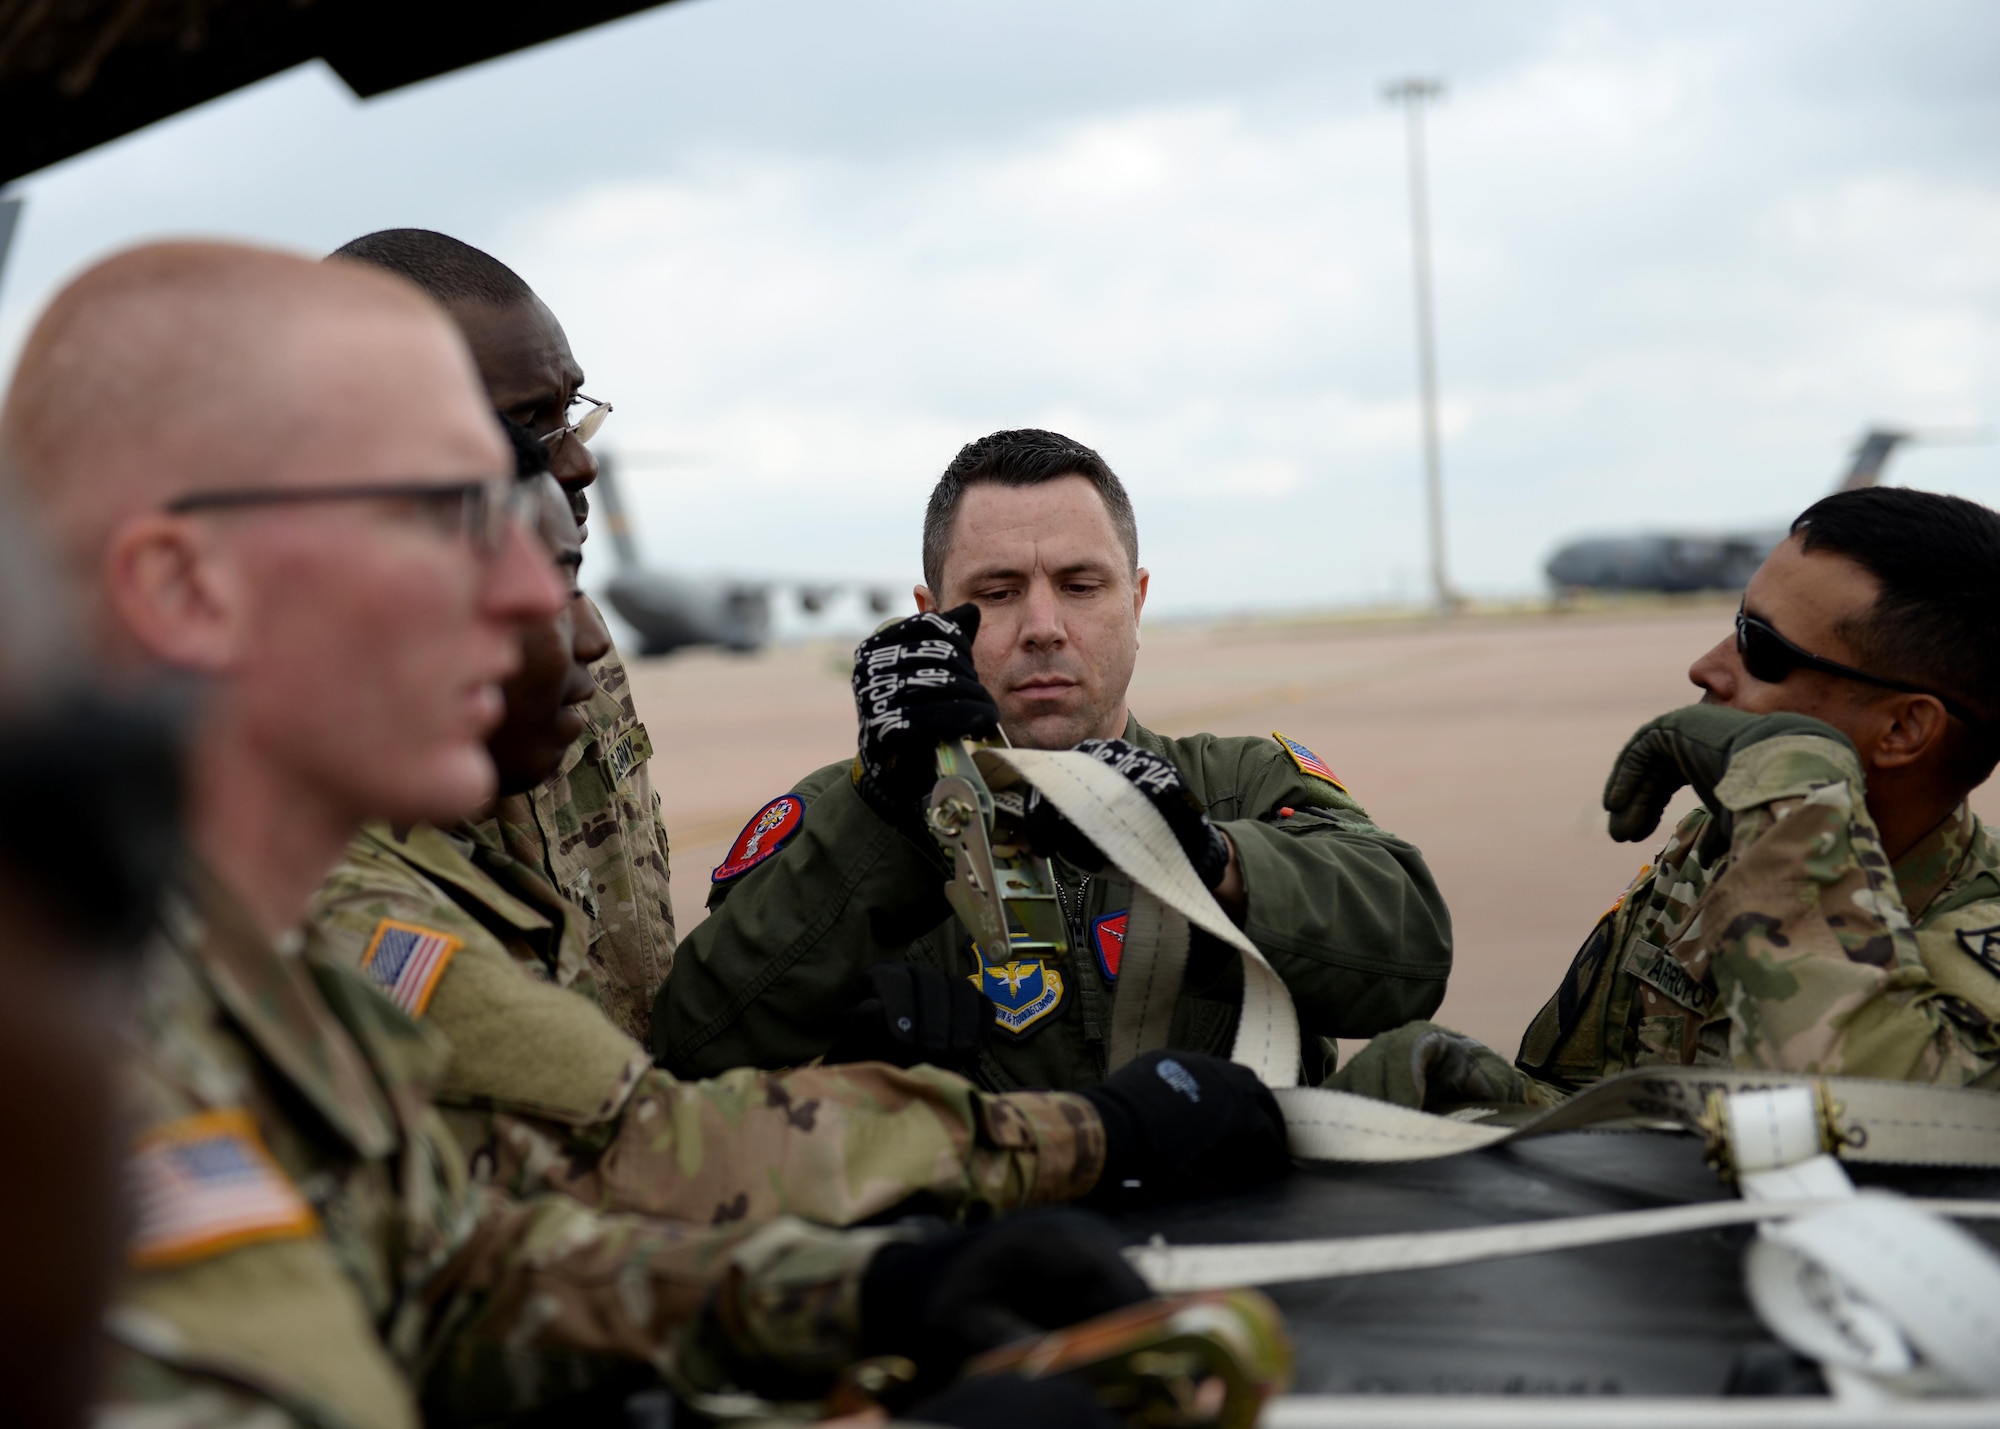 U.S. Air Force Staff Sgt. C.J. Crew, 58th Airlift Squadron instructor loadmaster, demonstrates how to properly secure a cargo pallet U.S. Army Soldiers assigned to the 578th Forward Support Company at Fort Sill, Oklahoma, March 23, 2017, at Altus Air Force Base, Oklahoma. The soldiers came to Altus AFB to learn how to secure cargo pallets and vehicles to a U.S. Air Force C-17 Globemaster III cargo aircrafts. (U.S. Air Force photo by Airman 1st Class Jackson N. Haddon/Released).